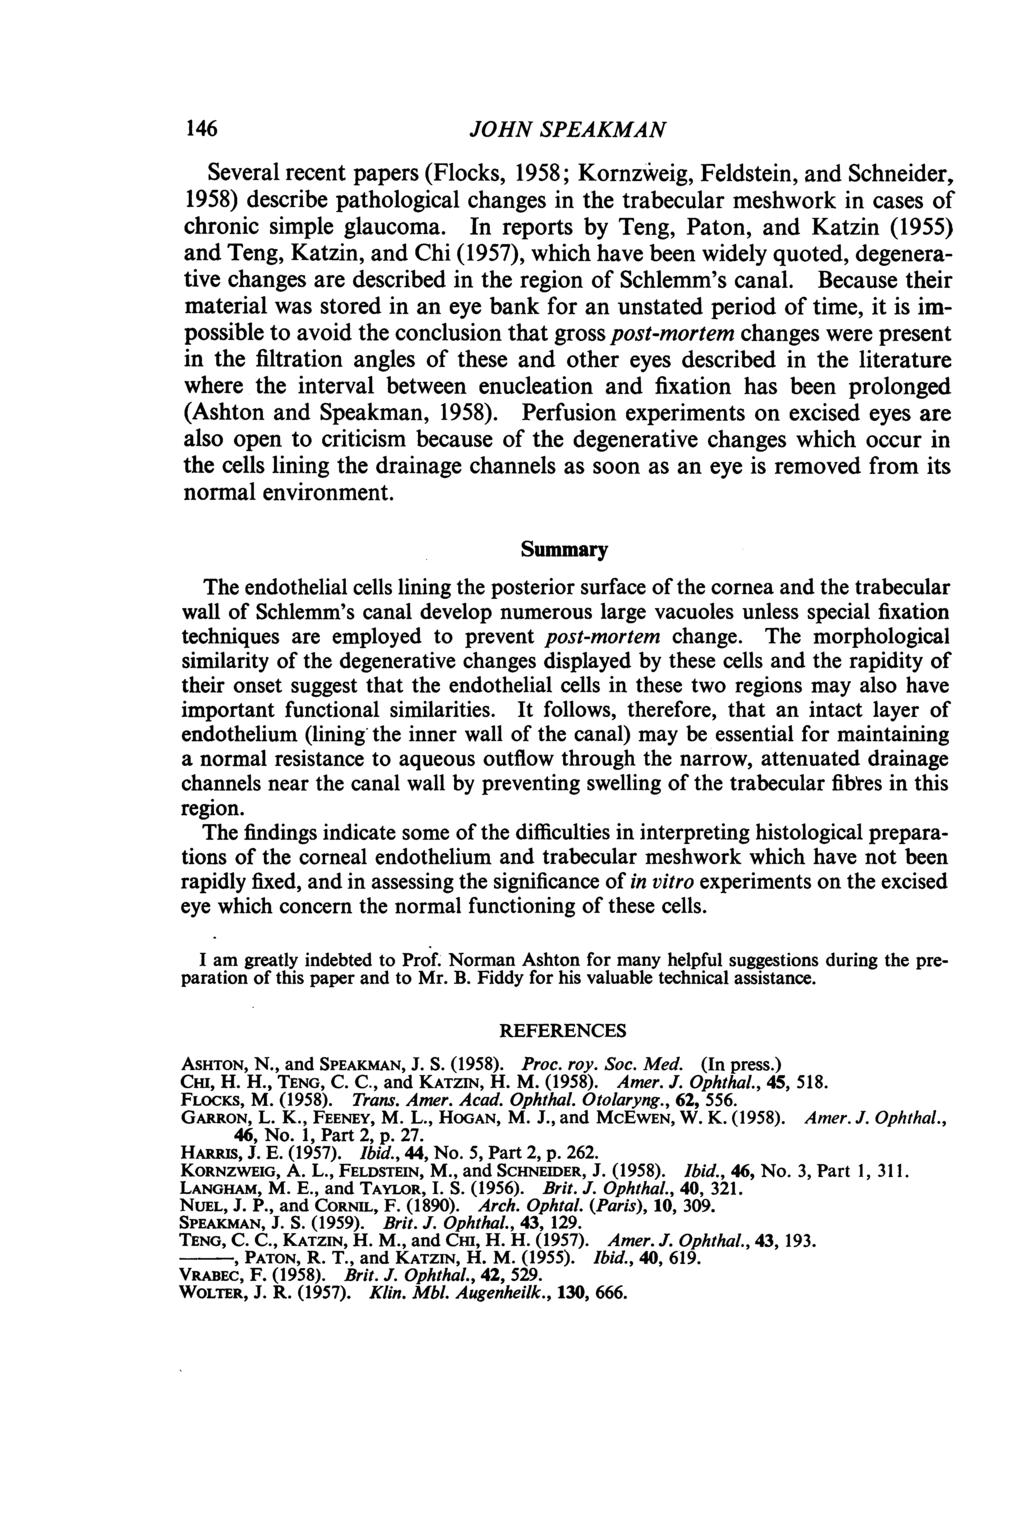 146 JOHN SPEAKMAN Several recent papers (Flocks, 1958; Kornzweig, Feldstein, and Schneider, 1958) describe pathological changes in the trabecular meshwork in cases of chronic simple glaucoma.